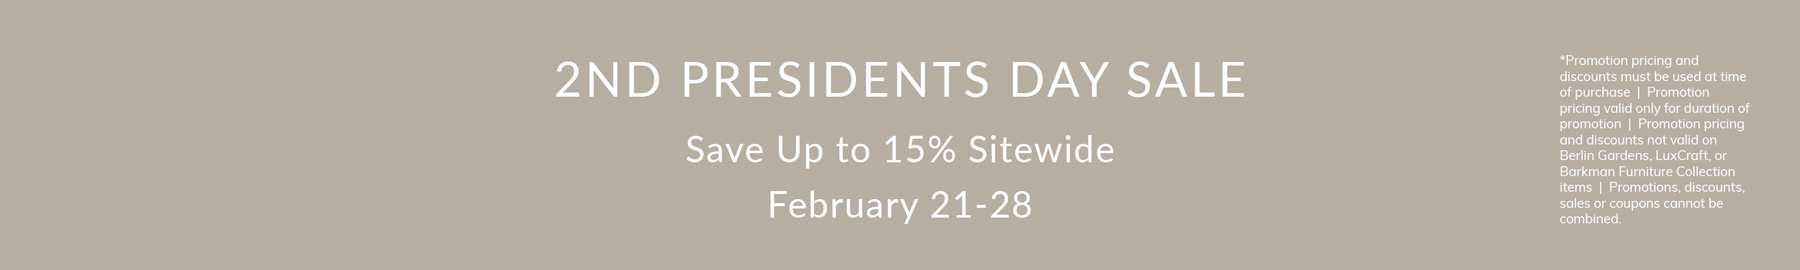 Presidents Day Sitewide Sale